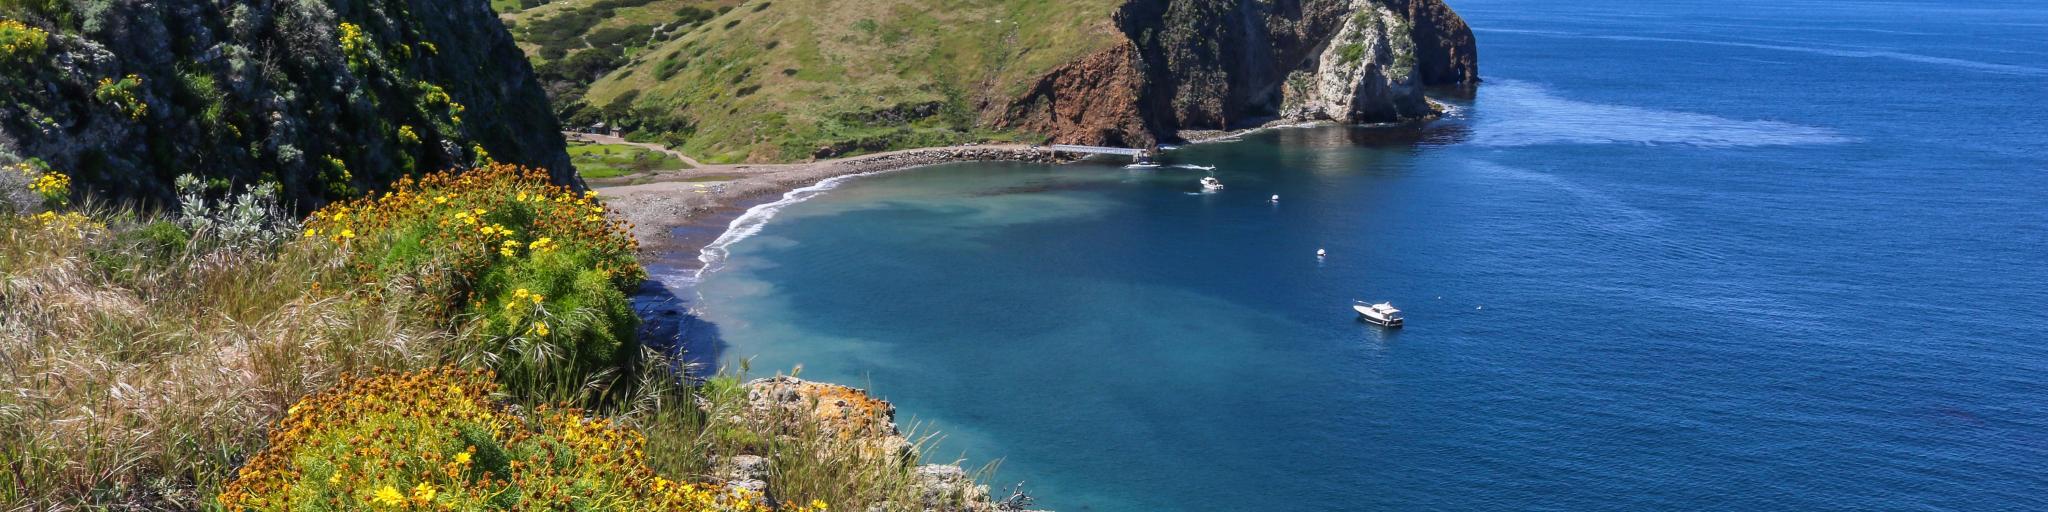 Santa Cruz Island, Channel Islands National Park, California showing Scorpion Anchorage with wildflowers in the foreground and a calm sea beneath the mountainous terrain and blue sky above.